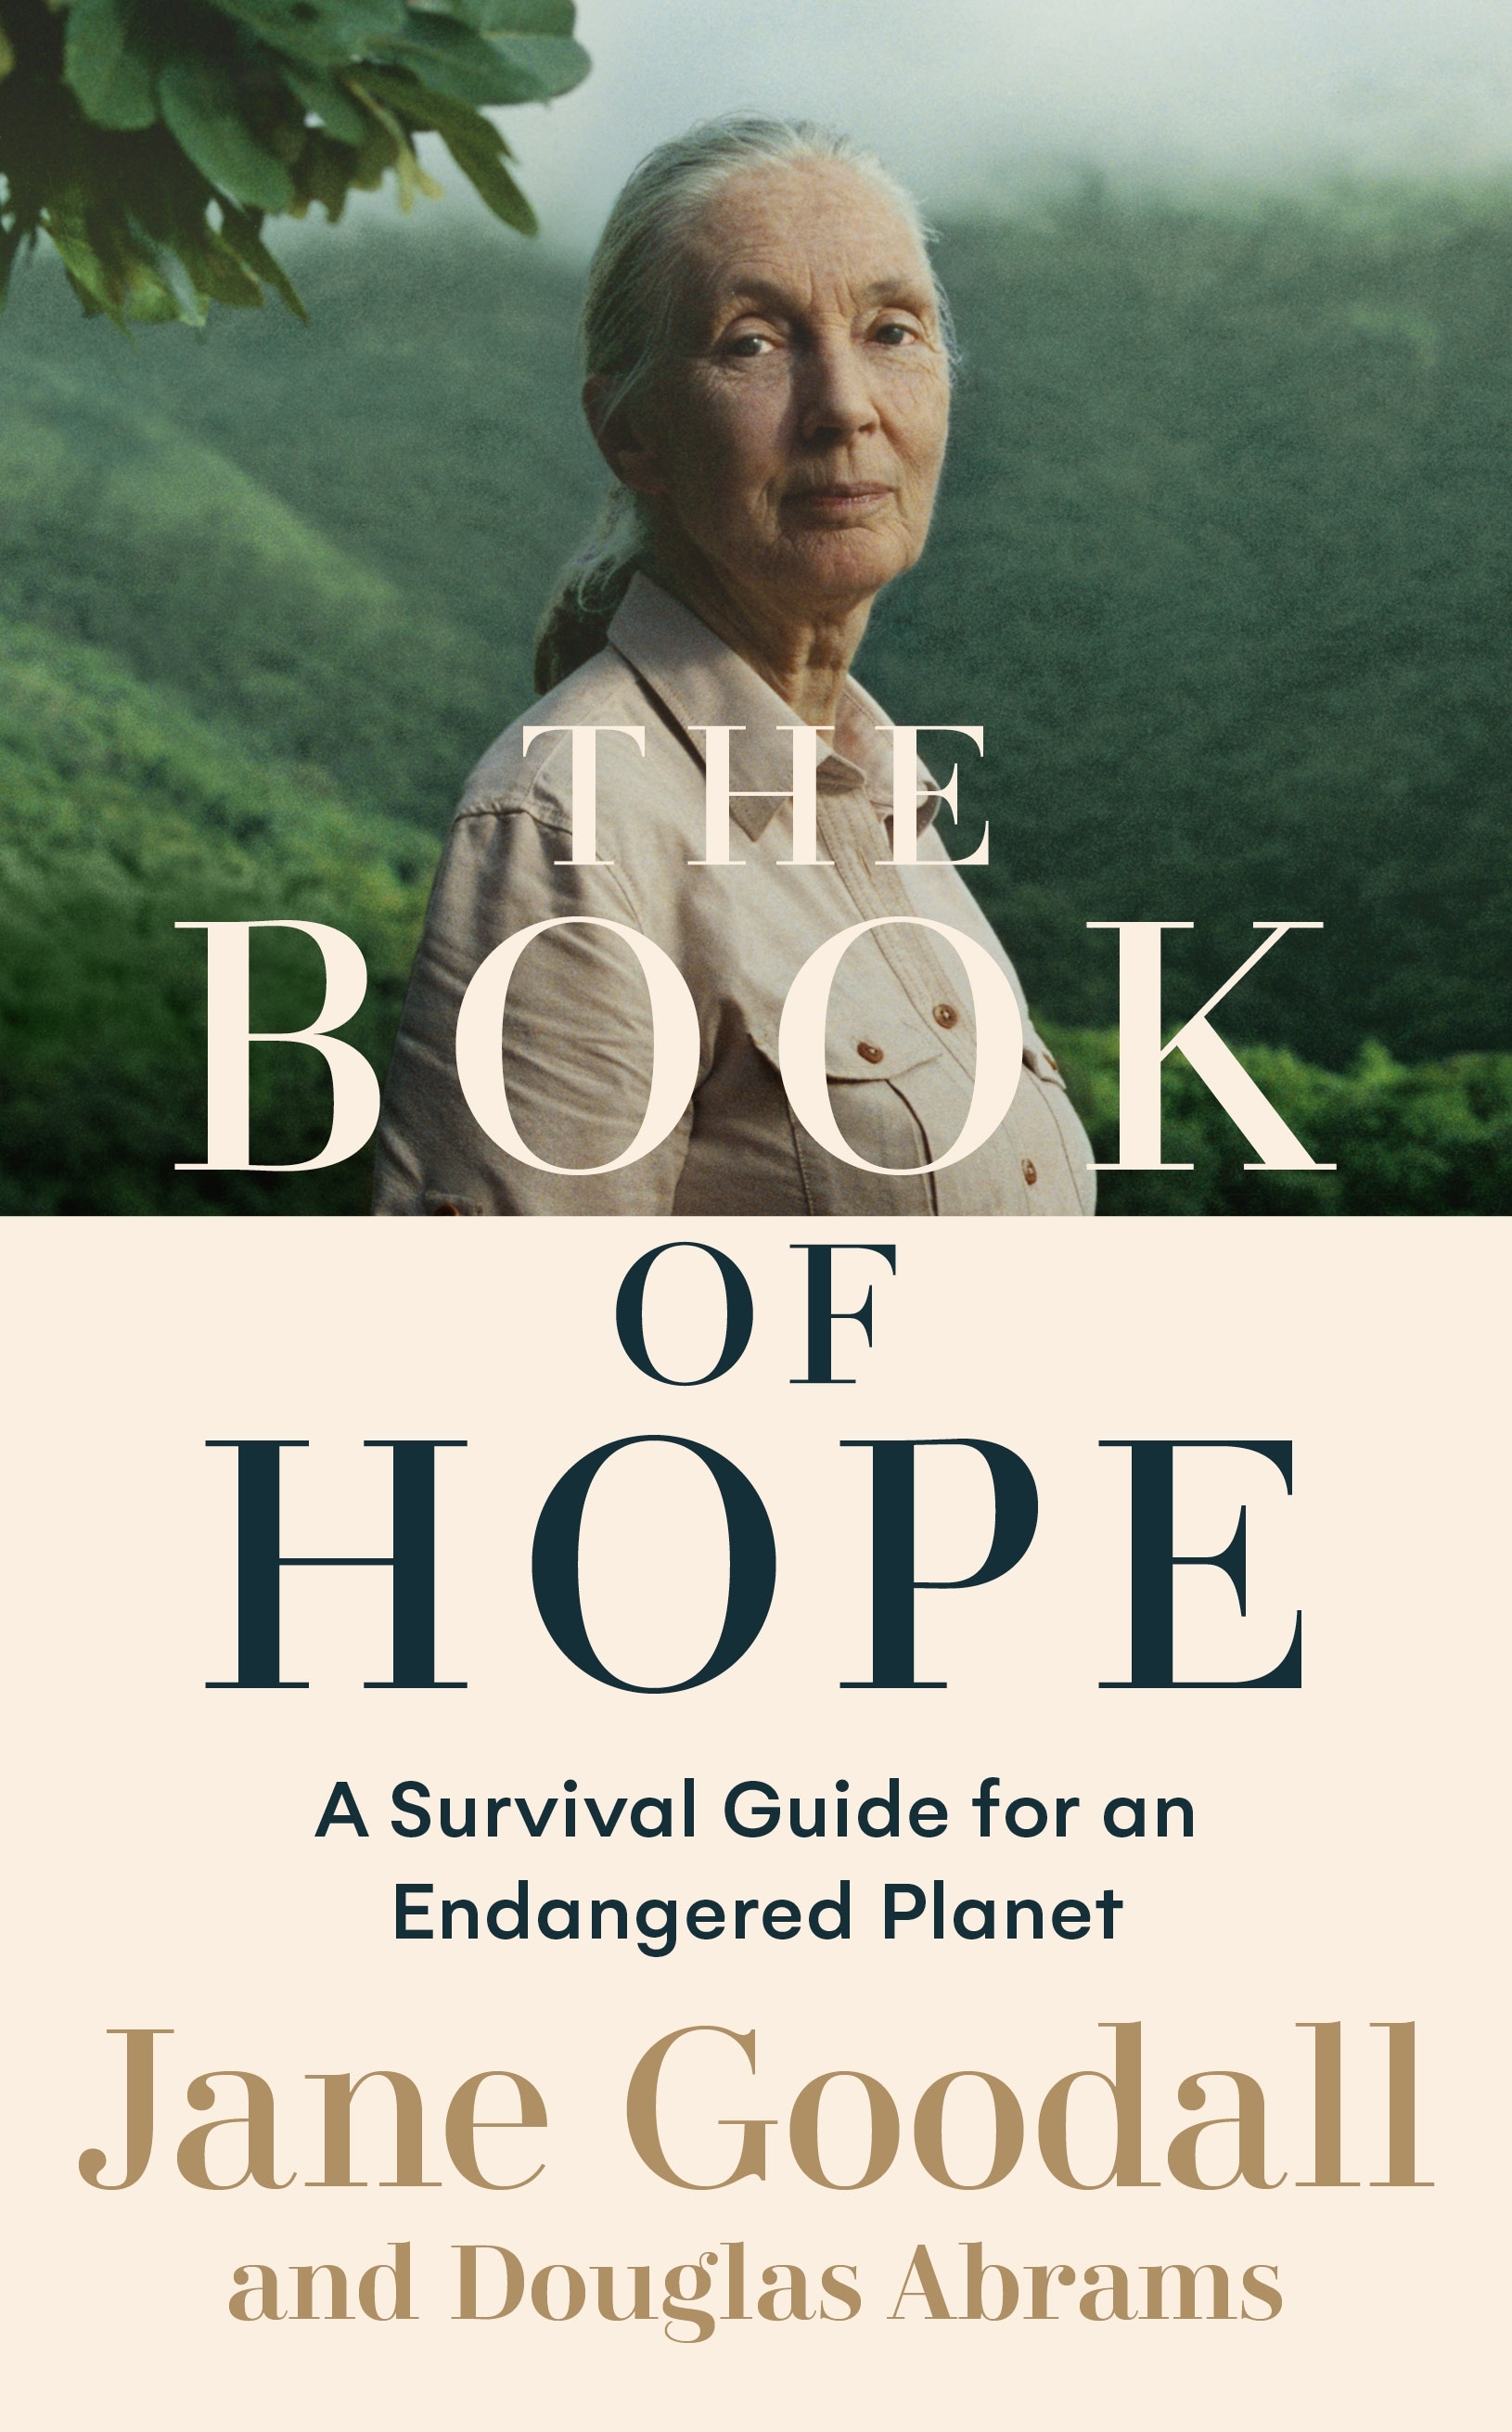 Book “The Book of Hope” by Jane Goodall, Douglas Abrams — October 21, 2021